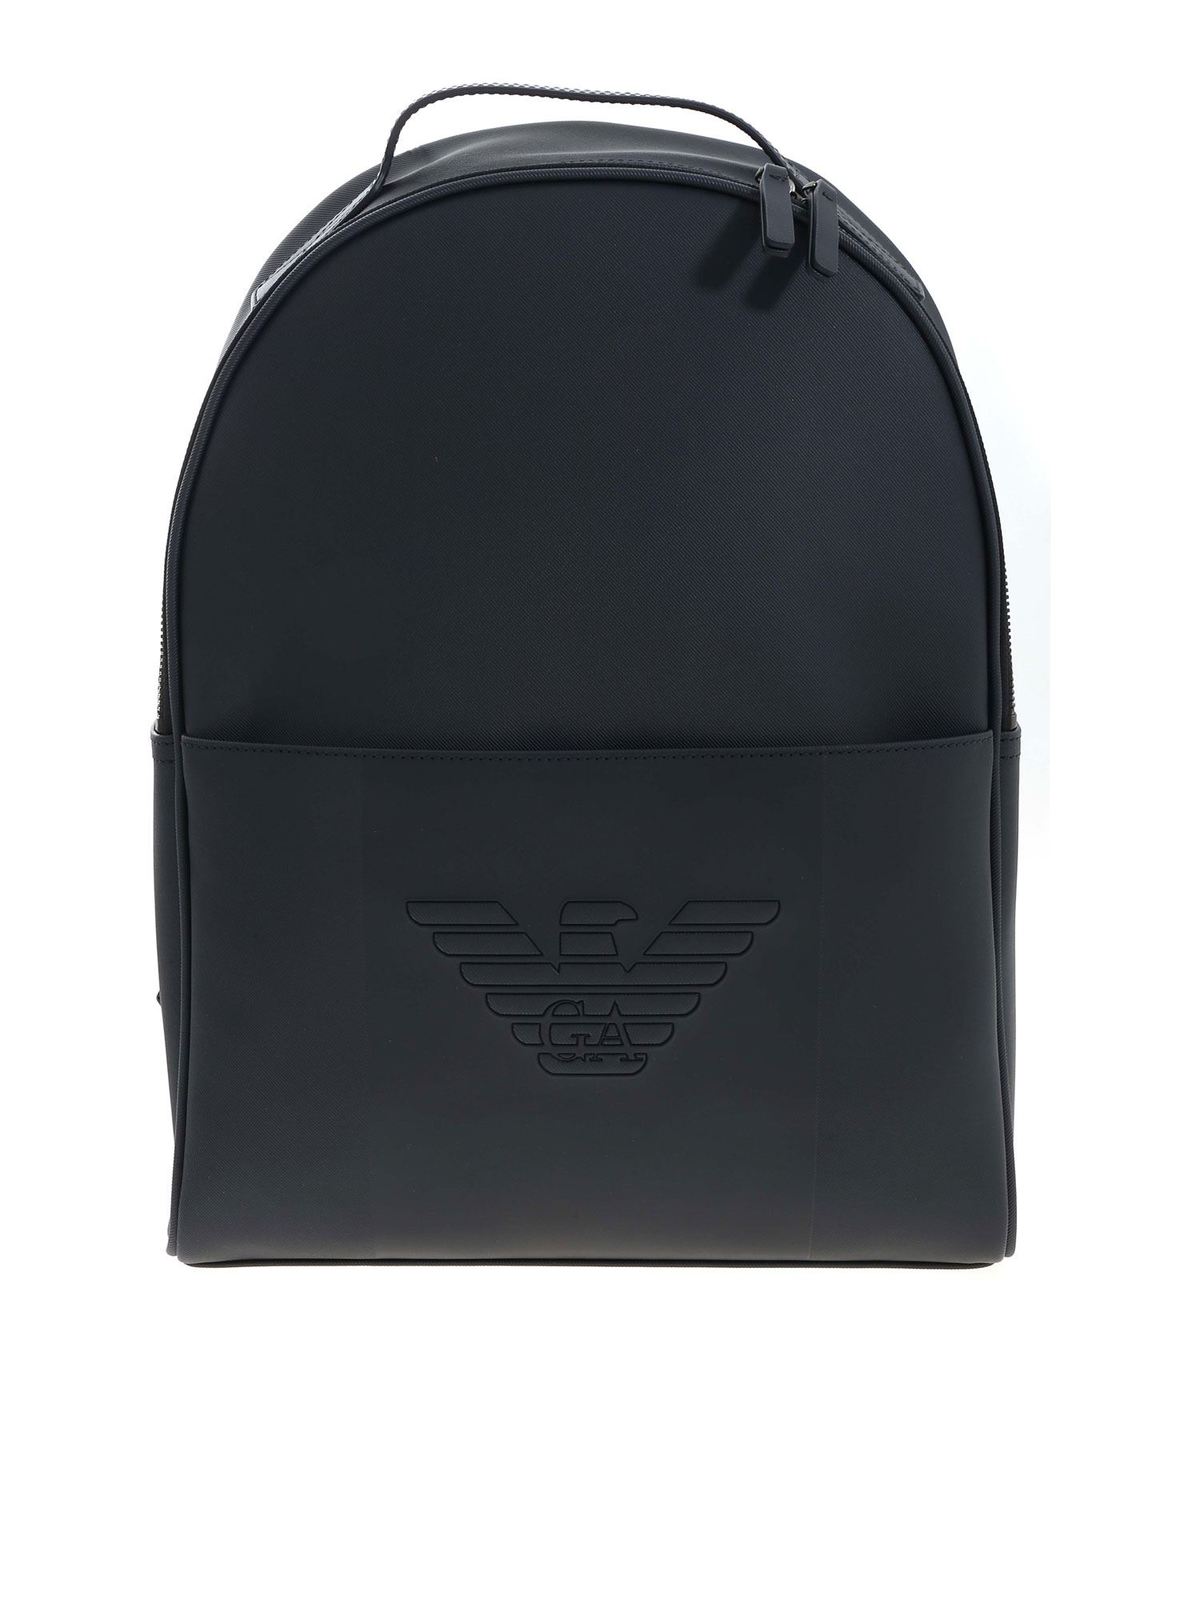 EMPORIO ARMANI LOGO BACKPACK IN BLUE